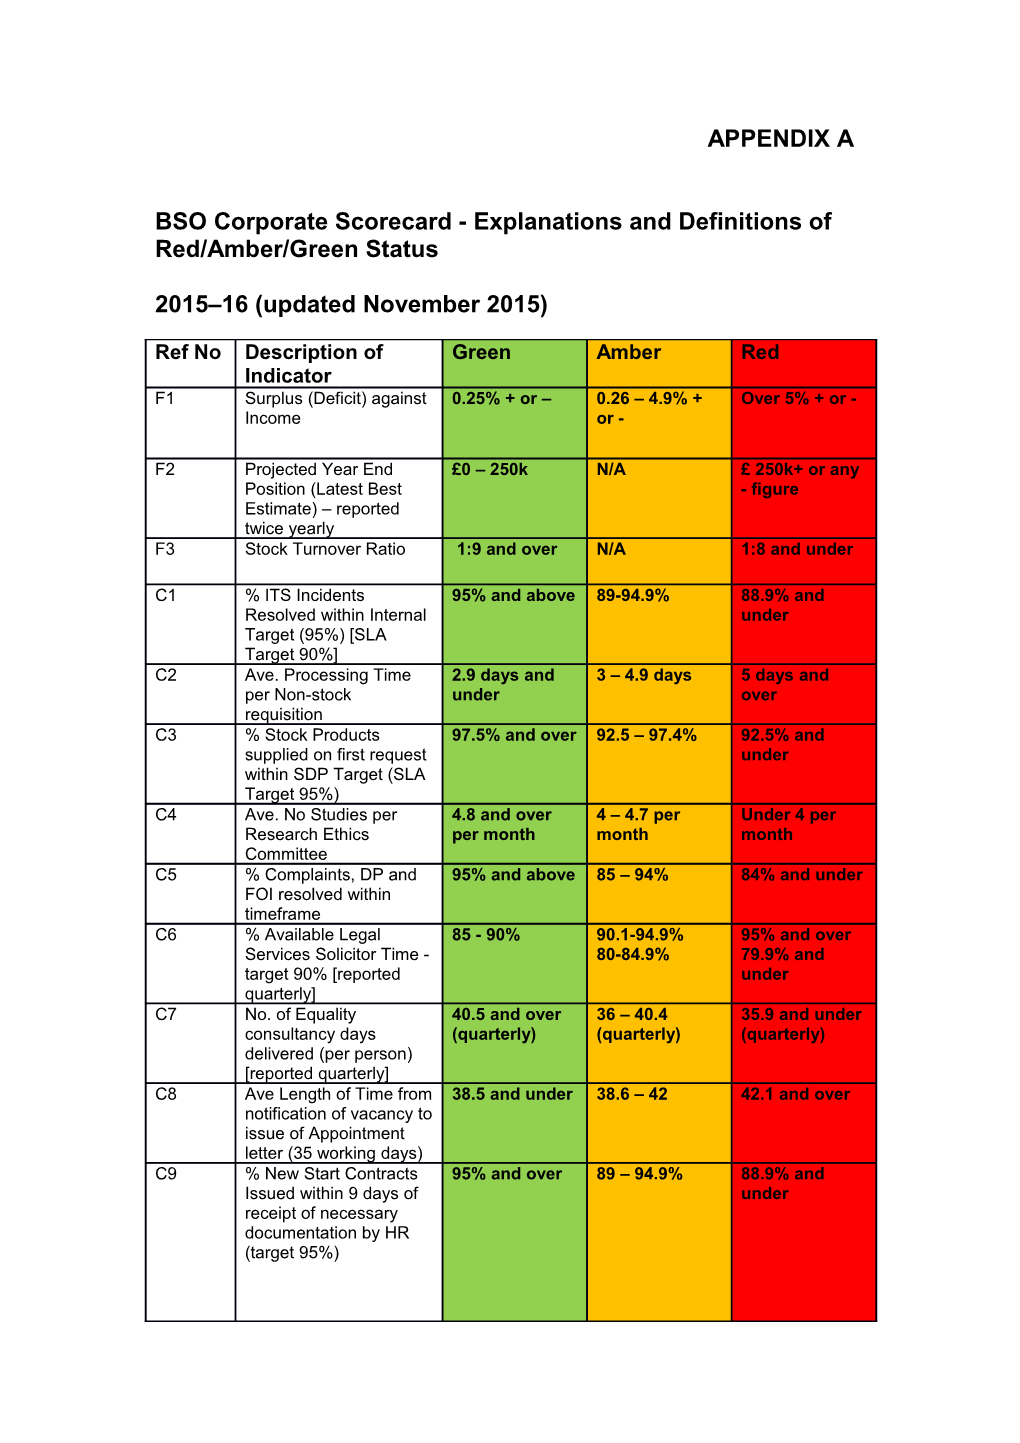 BSO Corporate Scorecard Explanations and Definitions of Red/Amber/Green Status